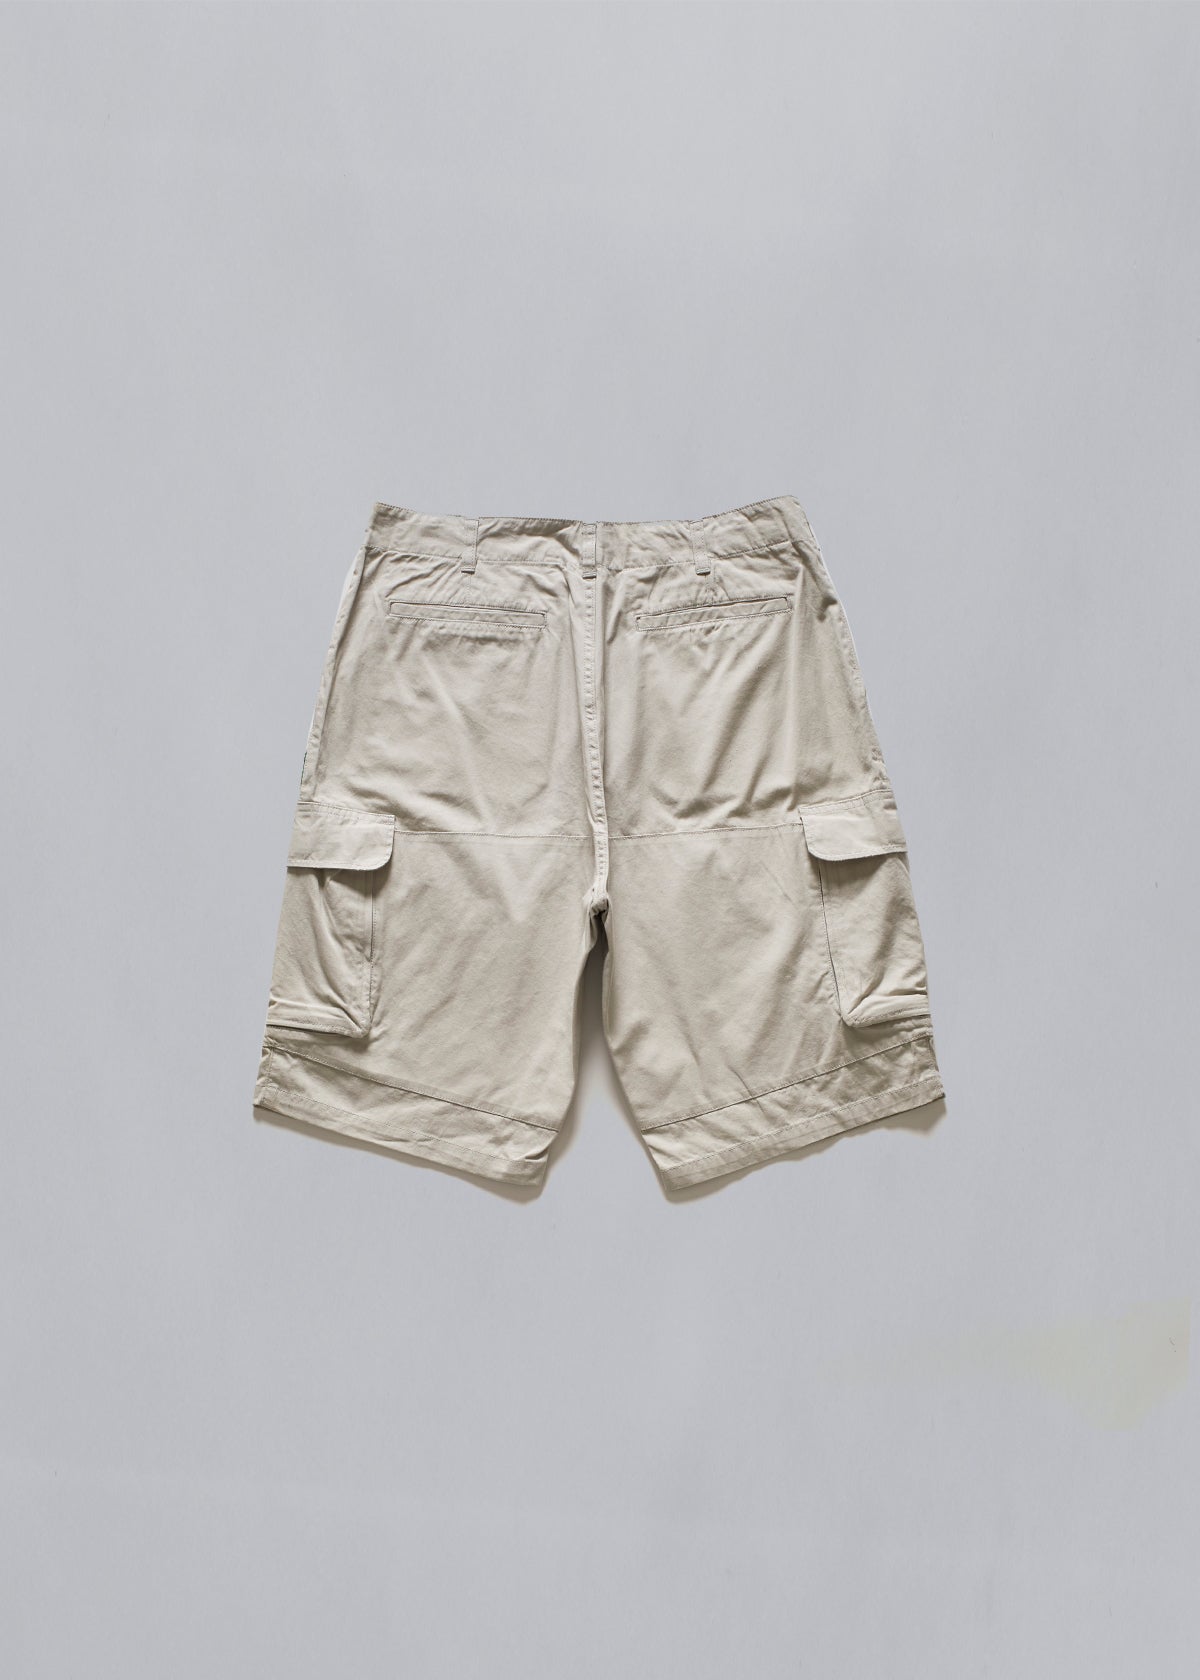 Ivory Classic Cargo Short 1990's - Large - The Archivist Store